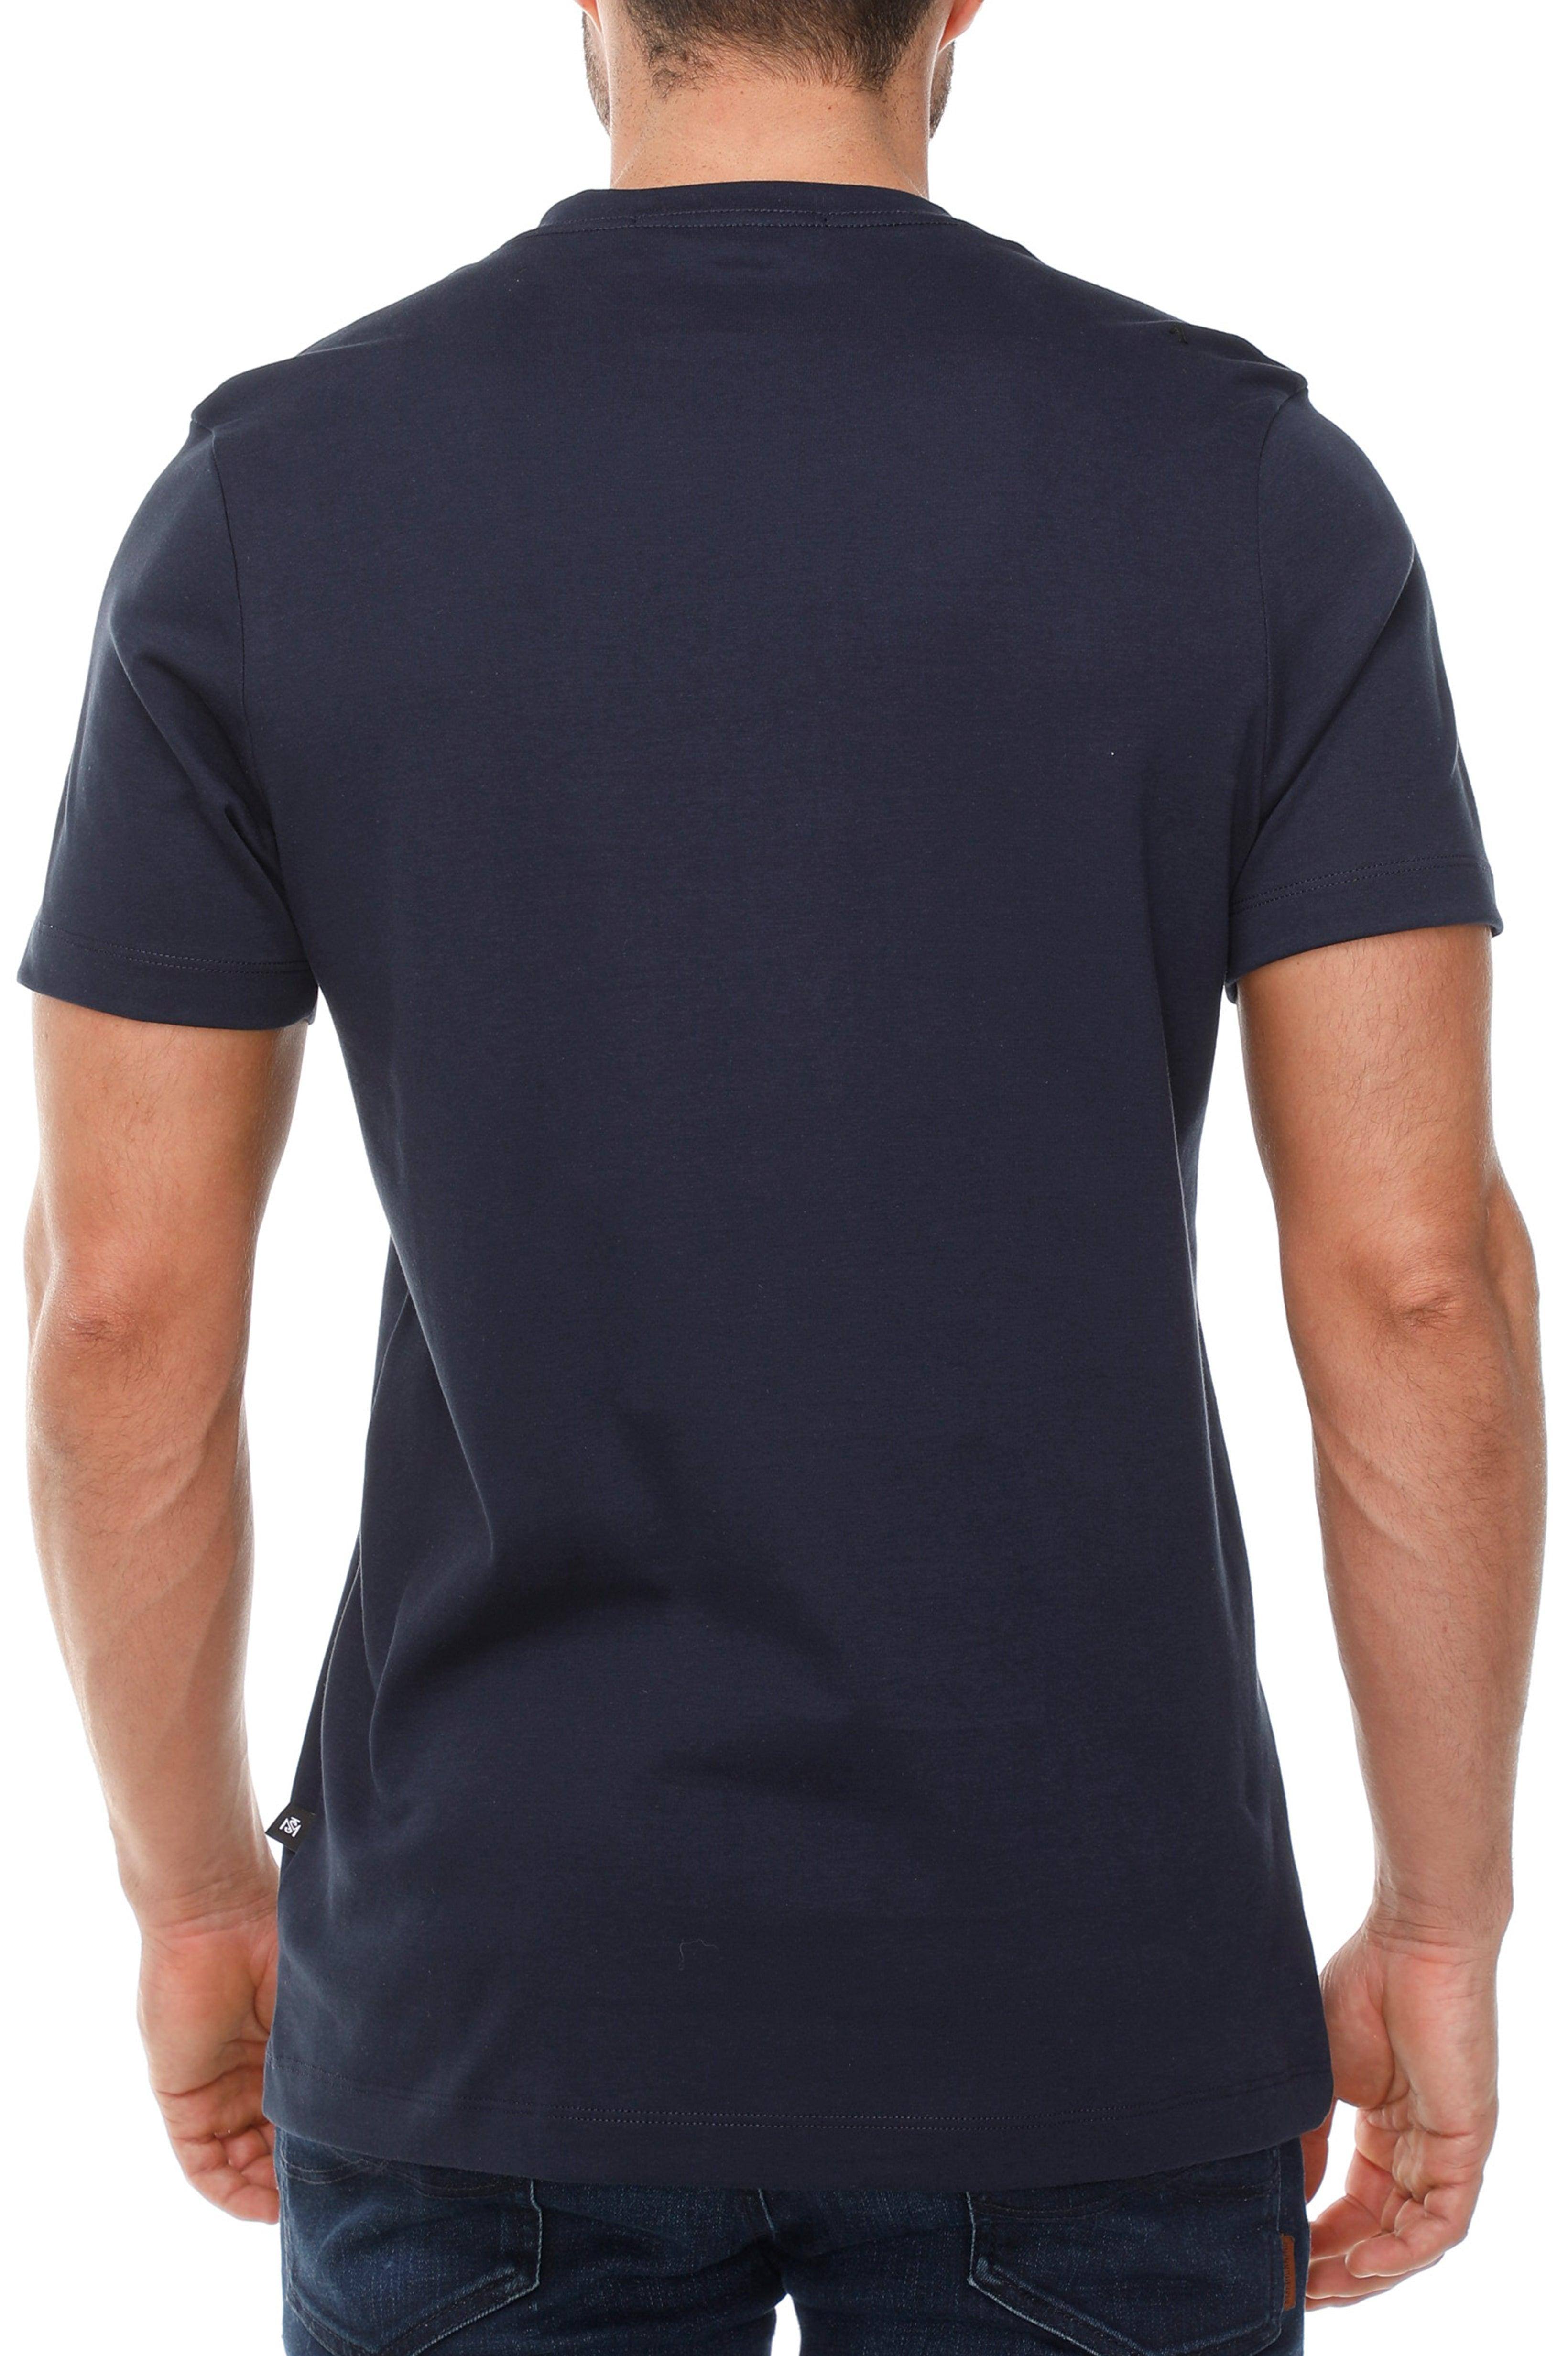 CYRO T-SHIRT NAVY | Monastery Couture